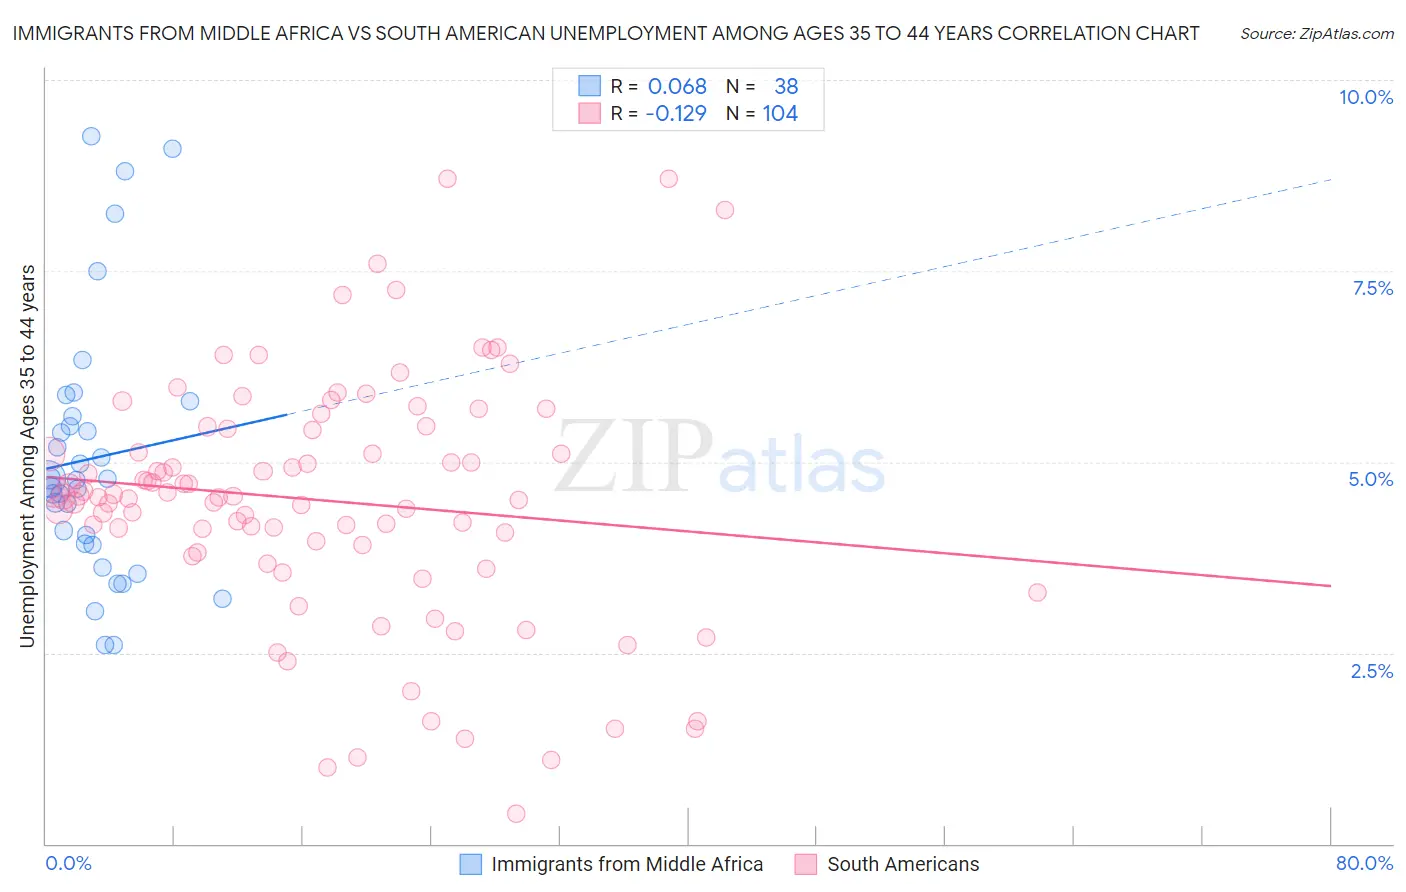 Immigrants from Middle Africa vs South American Unemployment Among Ages 35 to 44 years